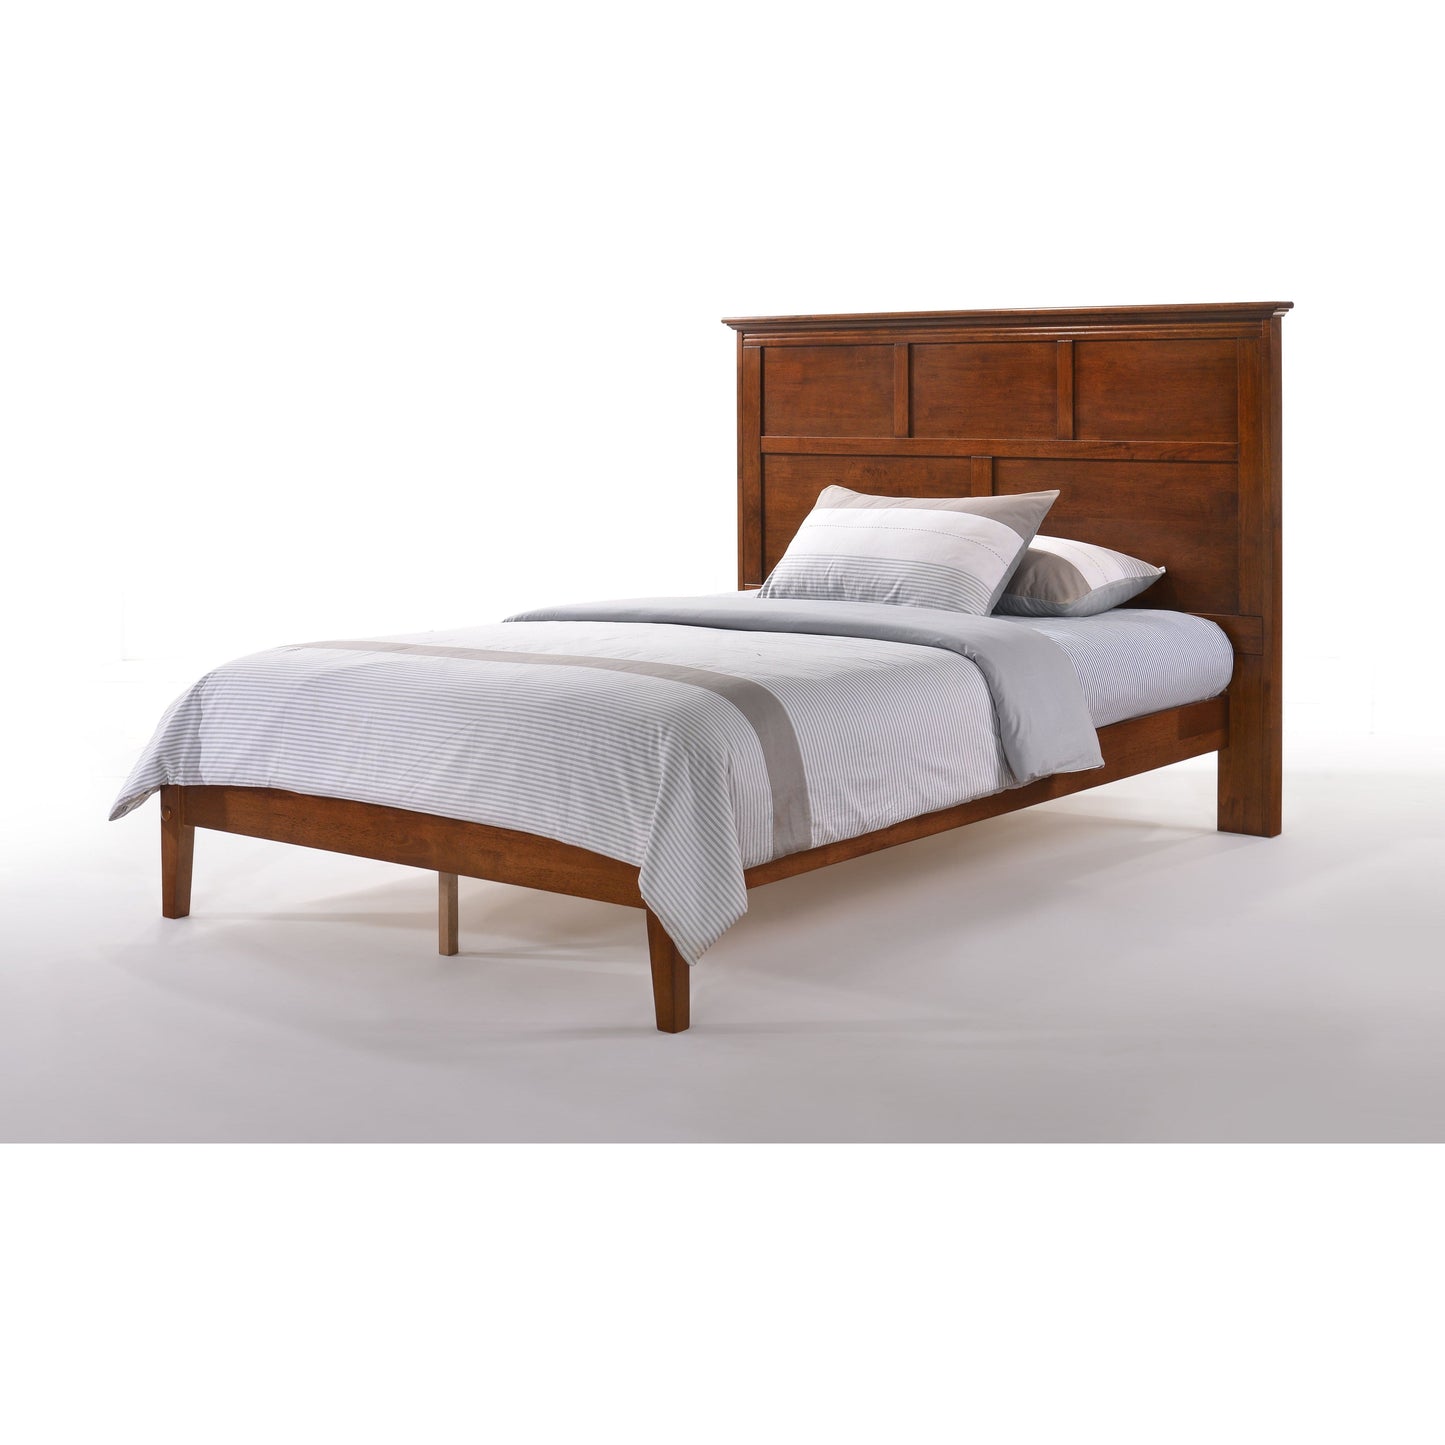 Night And Day Full Tarragon Bed Frame (P Series) in cherry finish Cherry TAR-PH-FUL-CH-COM